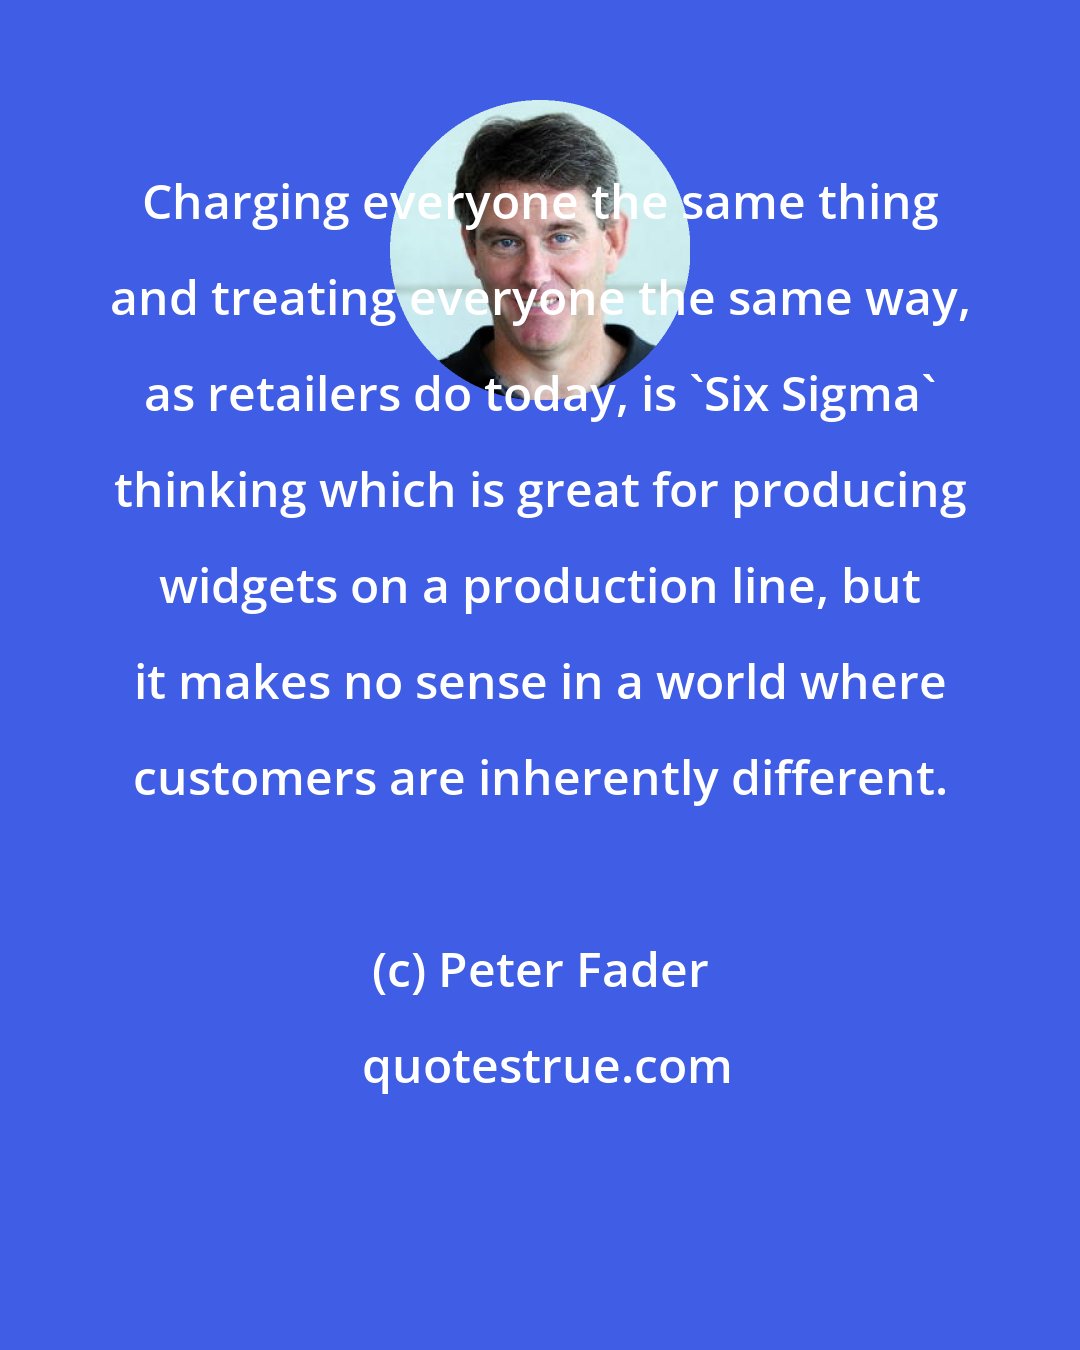 Peter Fader: Charging everyone the same thing and treating everyone the same way, as retailers do today, is 'Six Sigma' thinking which is great for producing widgets on a production line, but it makes no sense in a world where customers are inherently different.